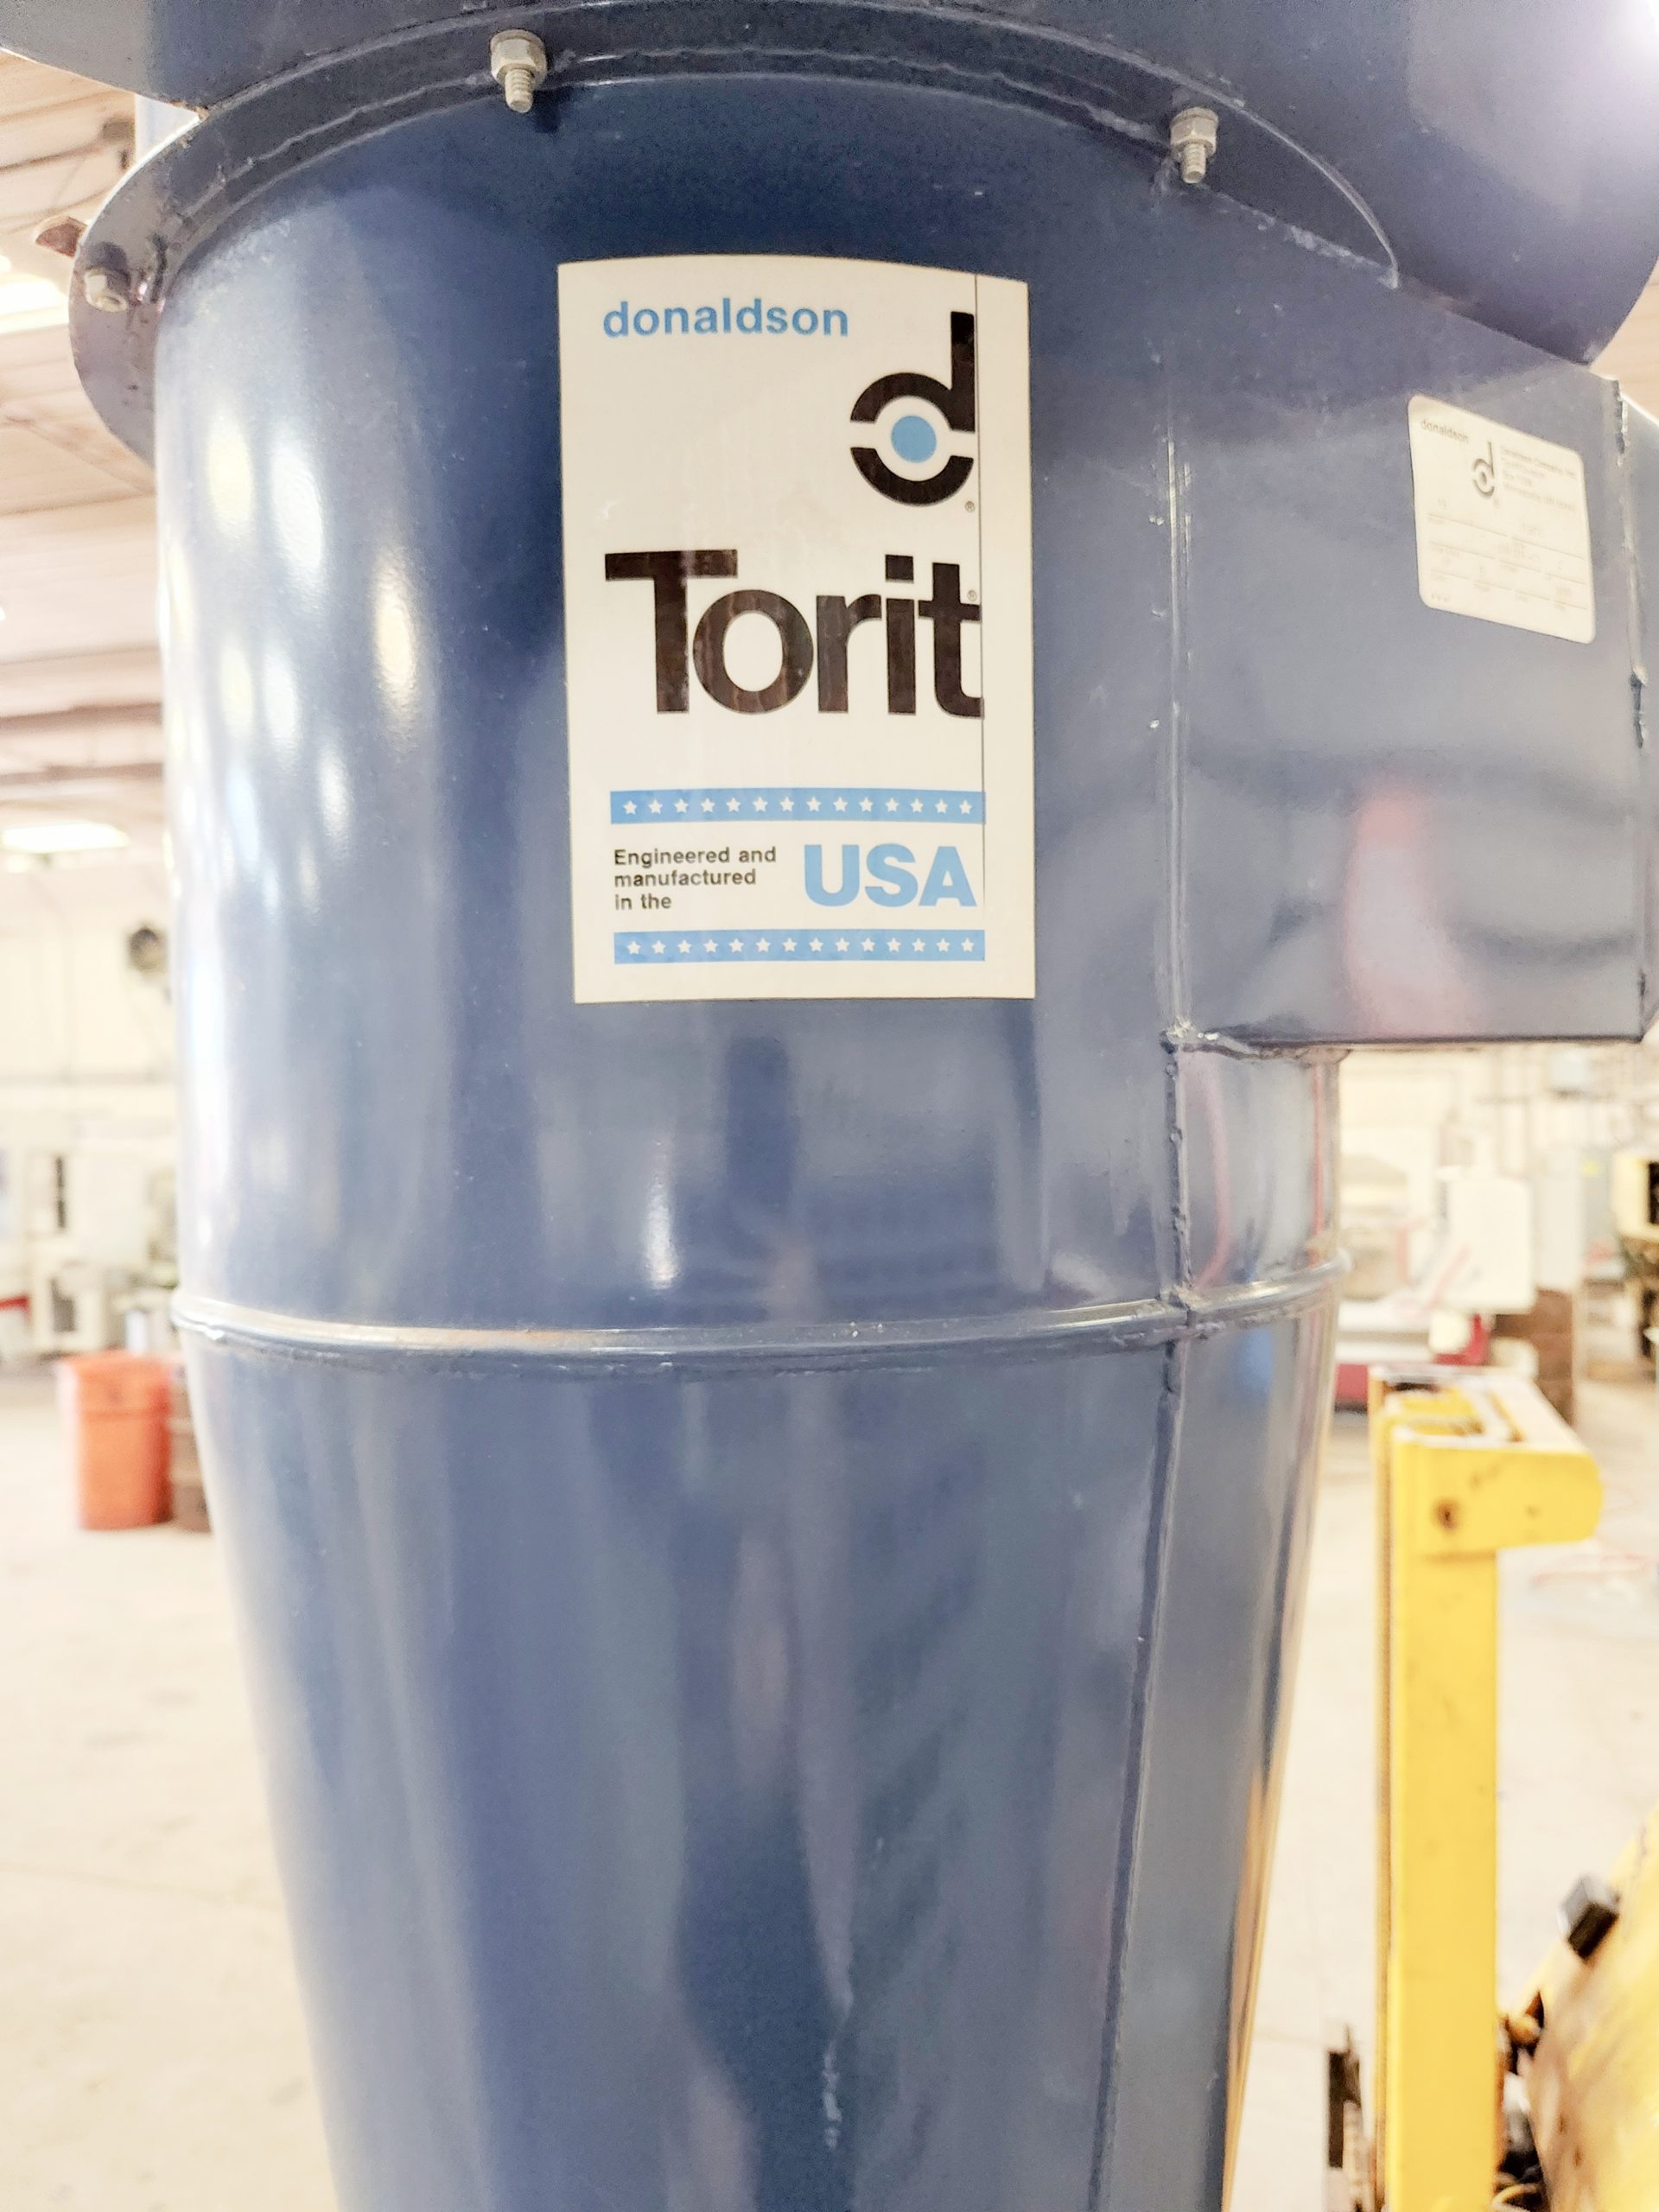 Donaldson Torit Cyclone Dust Collector (Used) Item # UE-081522D (Illinois)